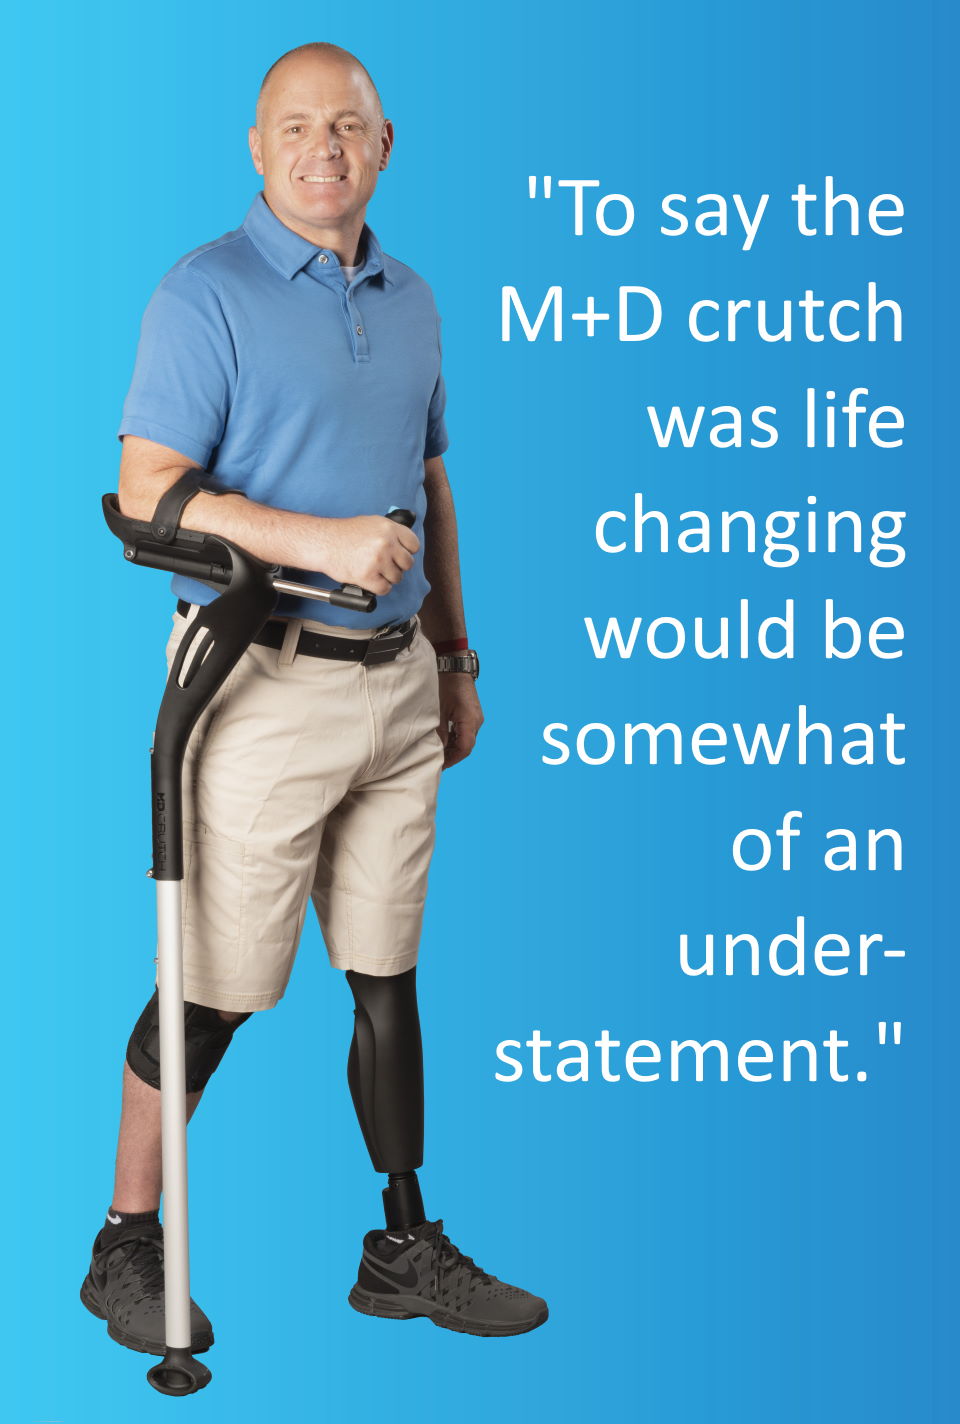 William testimonial about his experience using the M+D Crutch